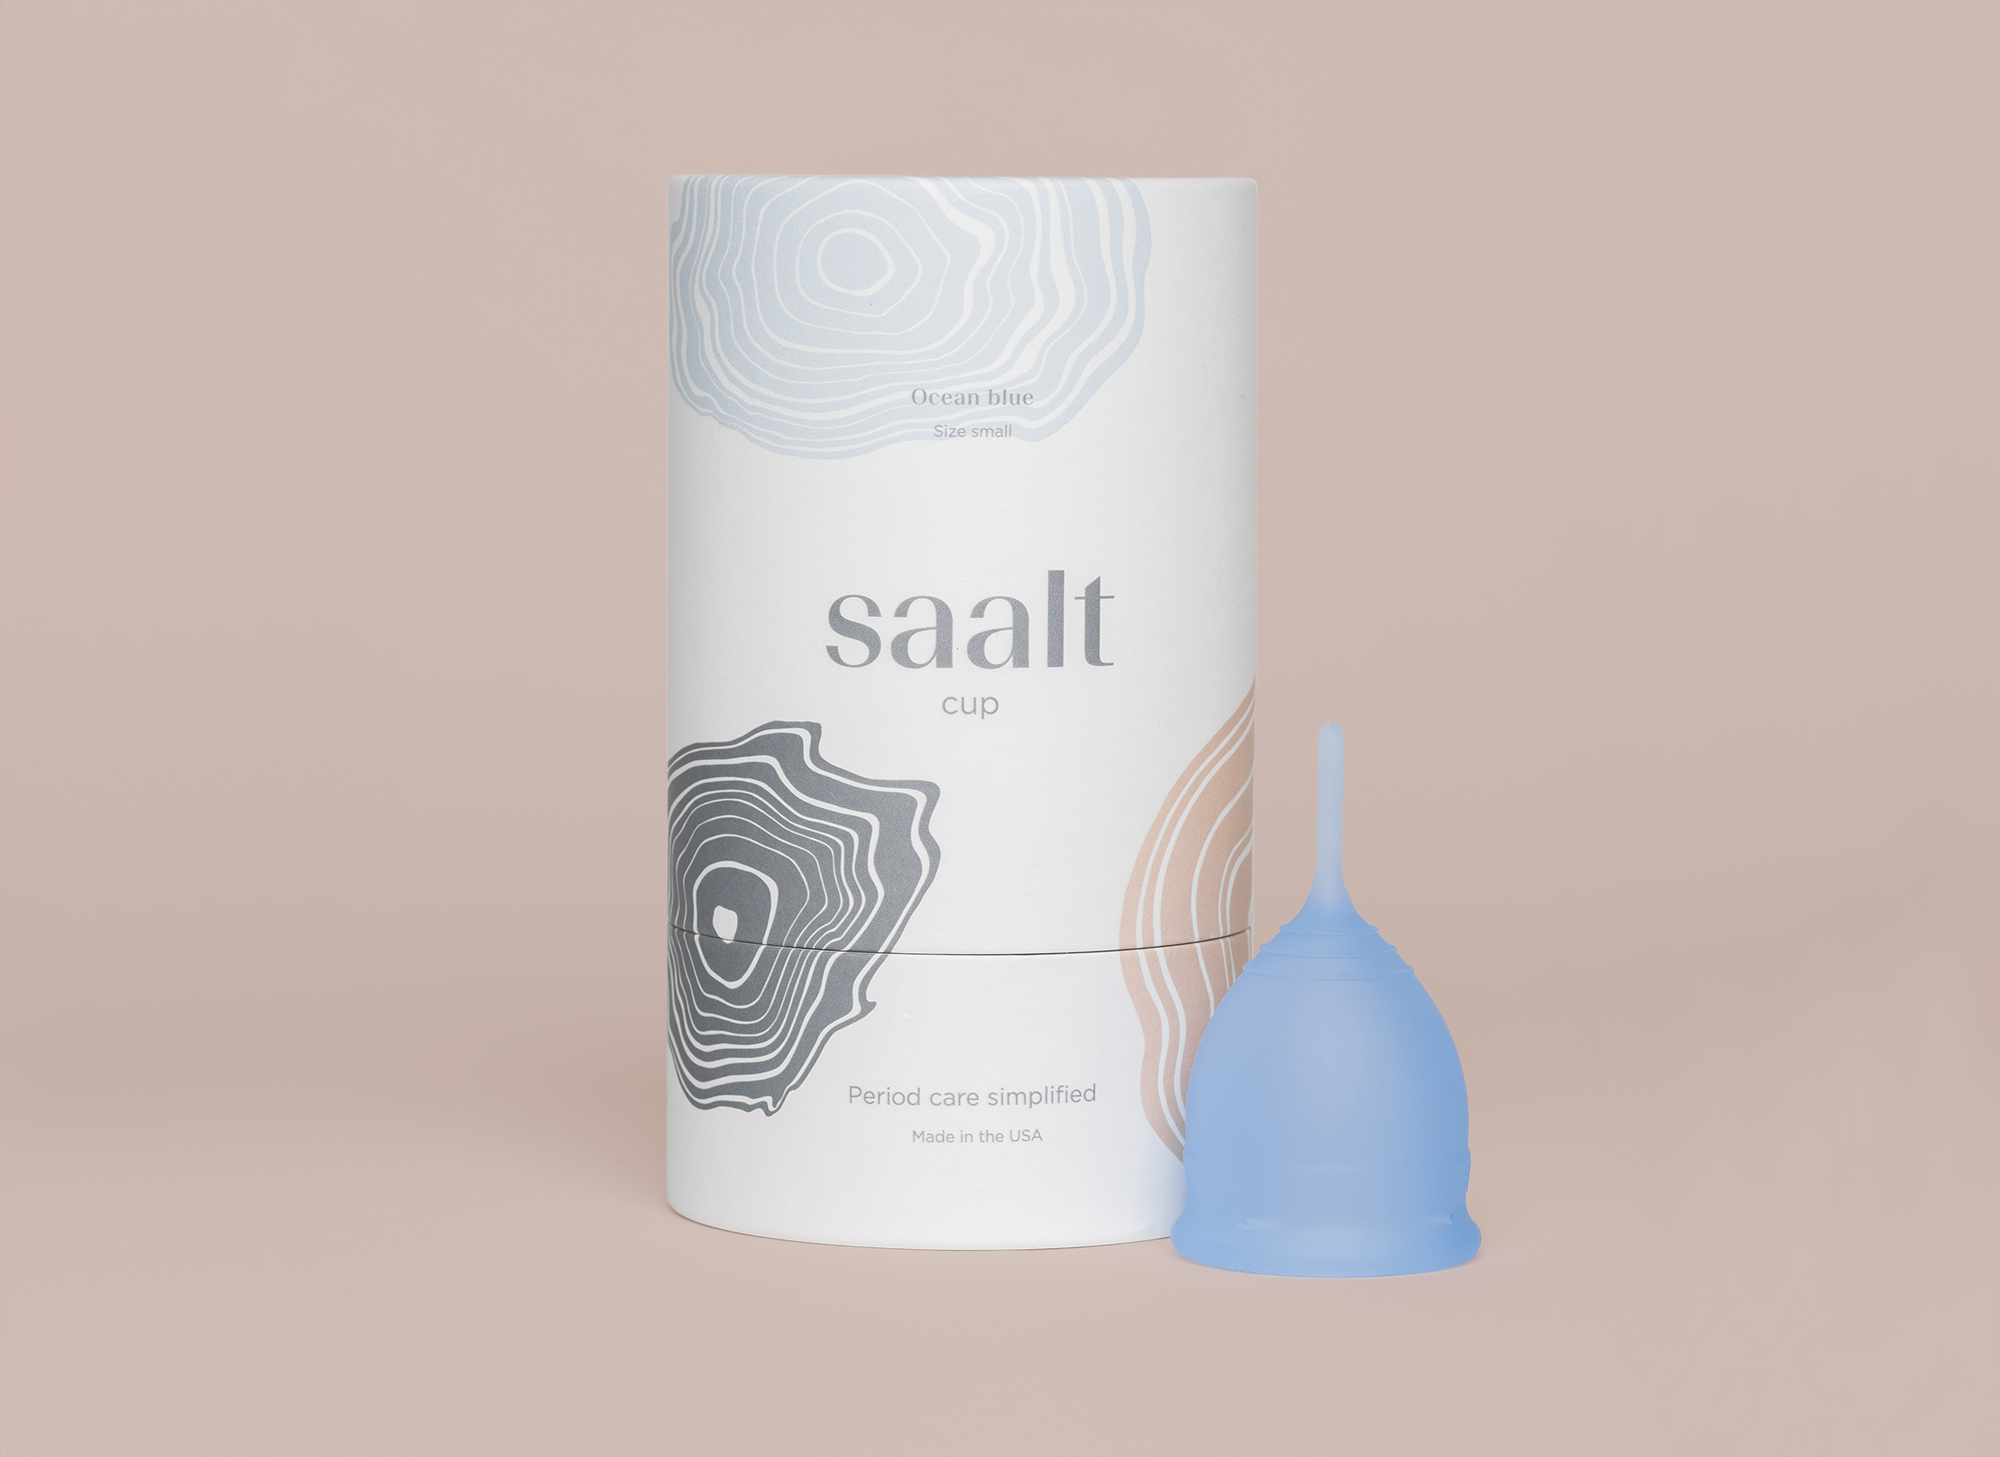 Blue menstrual cup next to tube packaging